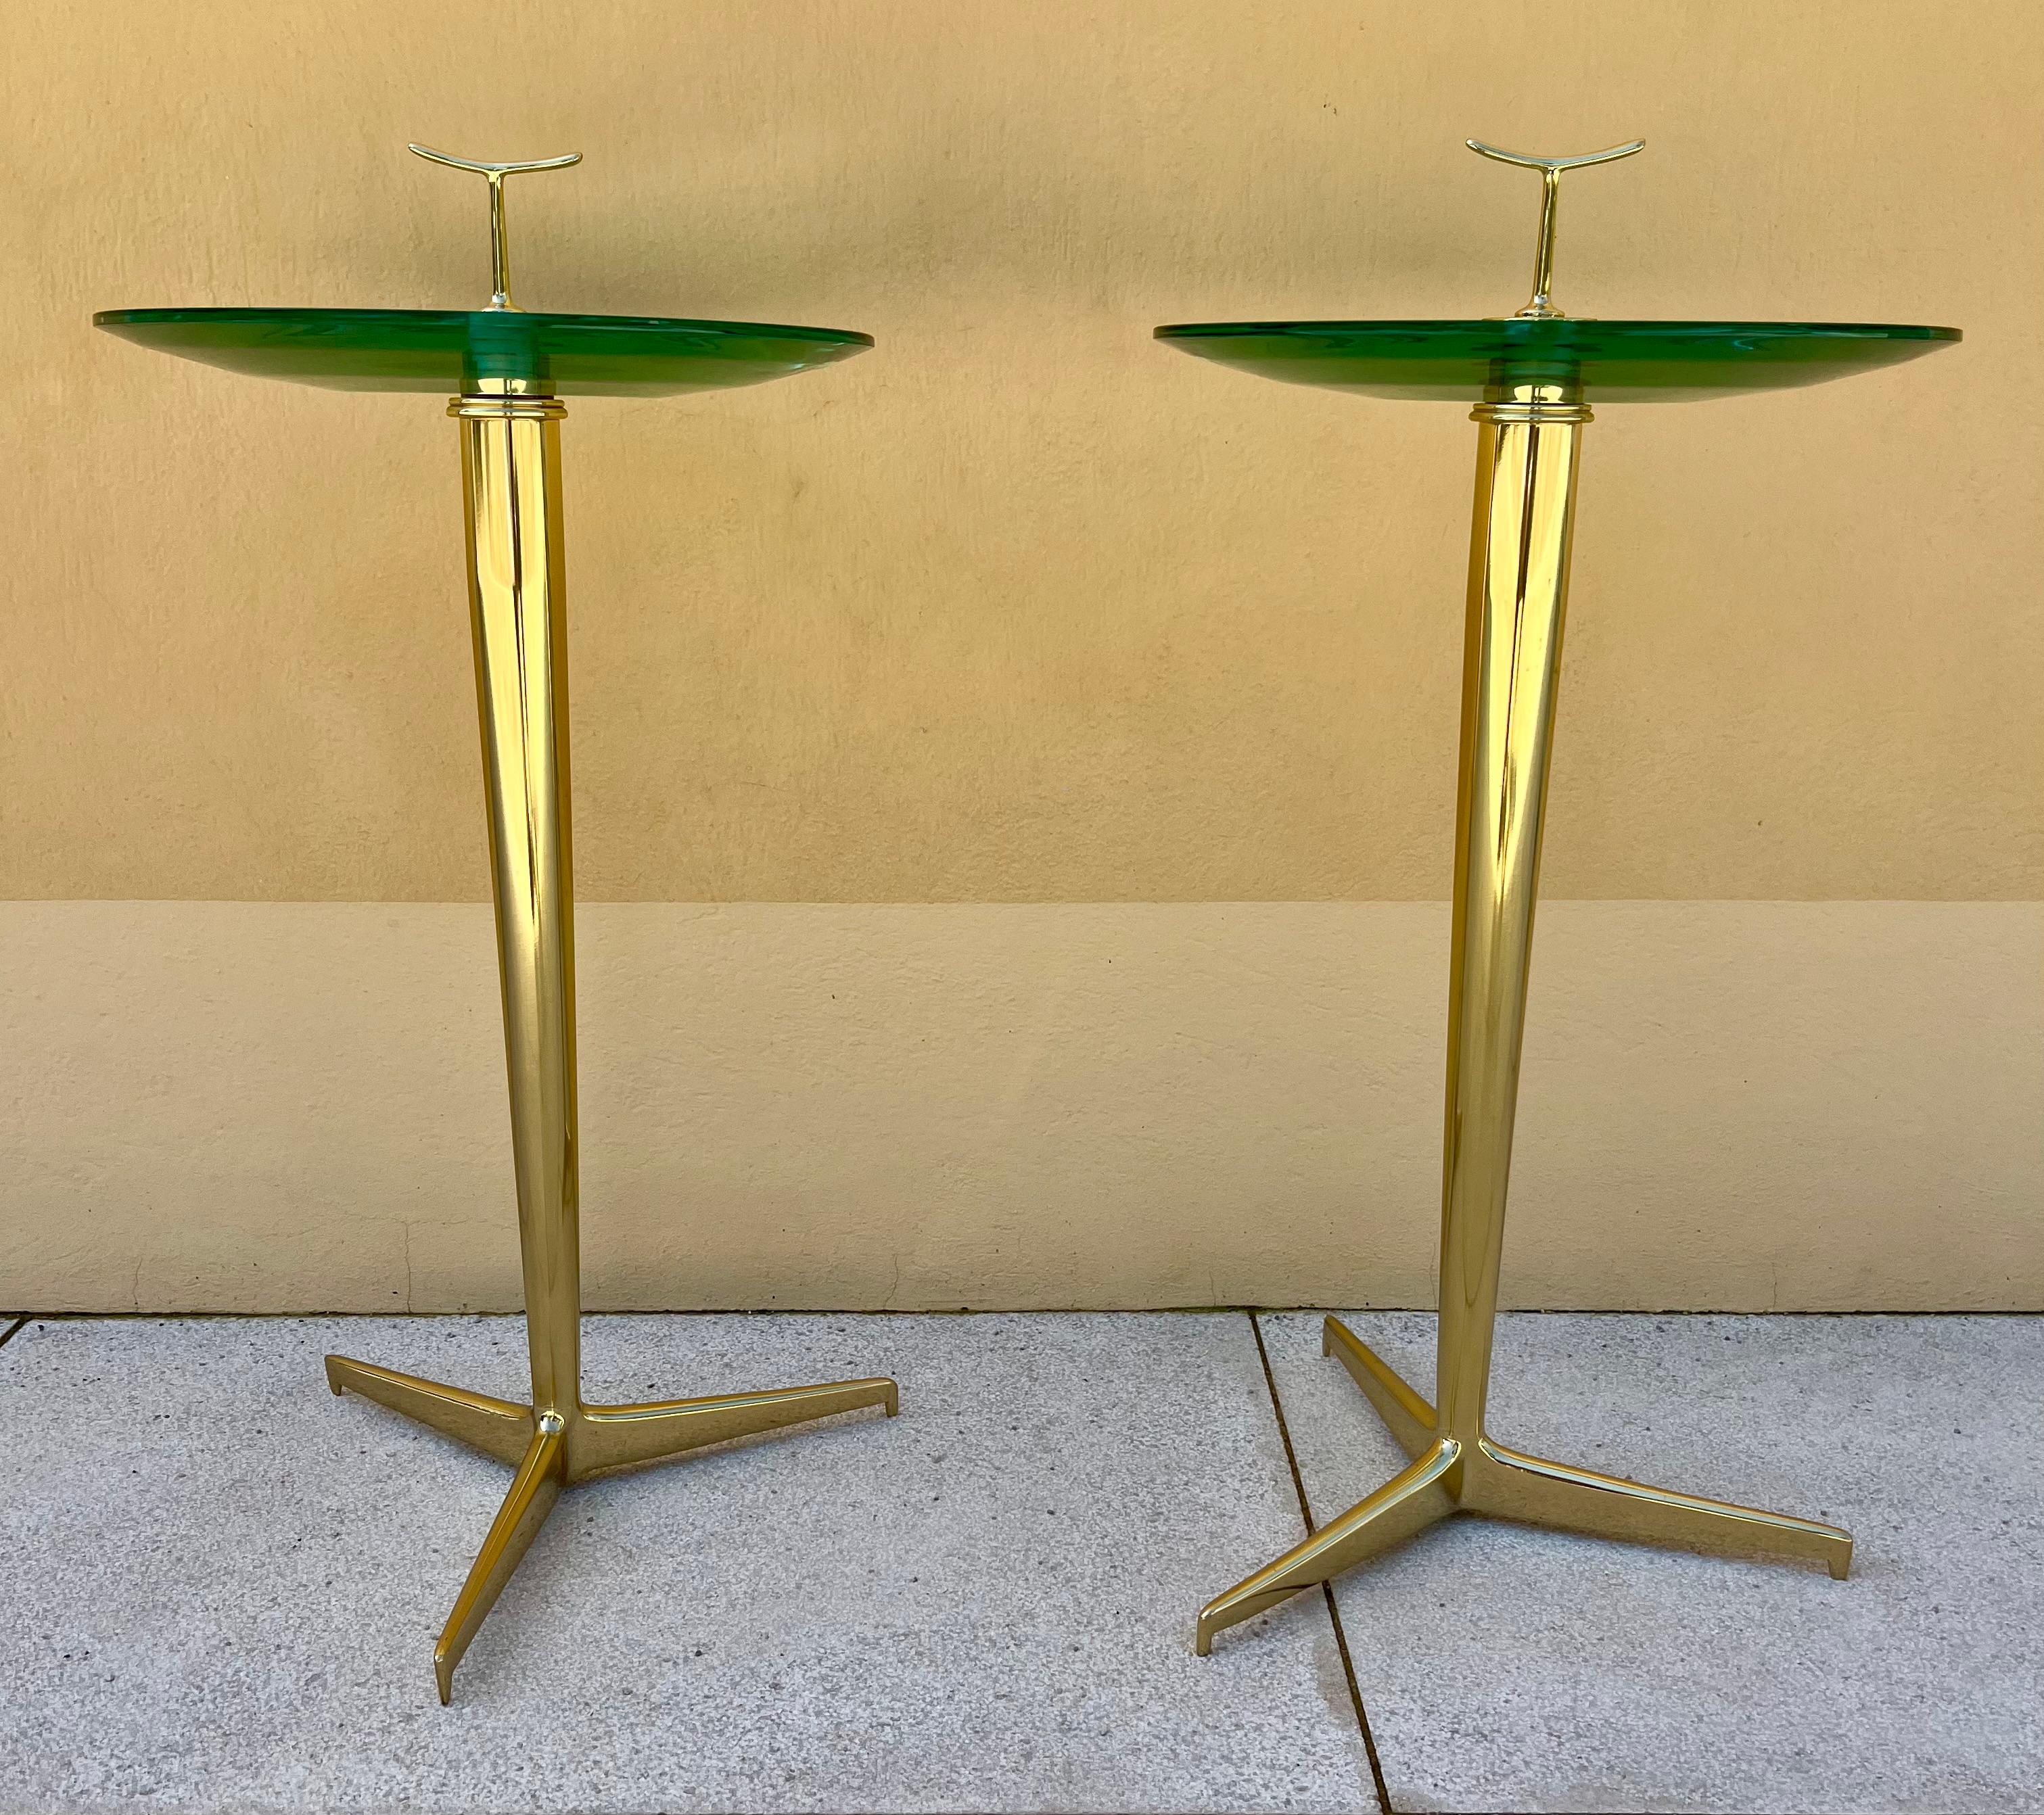 Elegant pair of side tables 
Brass tripod foot,
Brass handle;
Thick glass tray, the bottom curved and cut to produce a lens effect. 
Italy, circa 1980
The design of this gueridon is attributed to Angelo Ostuni or to Giuseppe Ostuni

Dimensions: